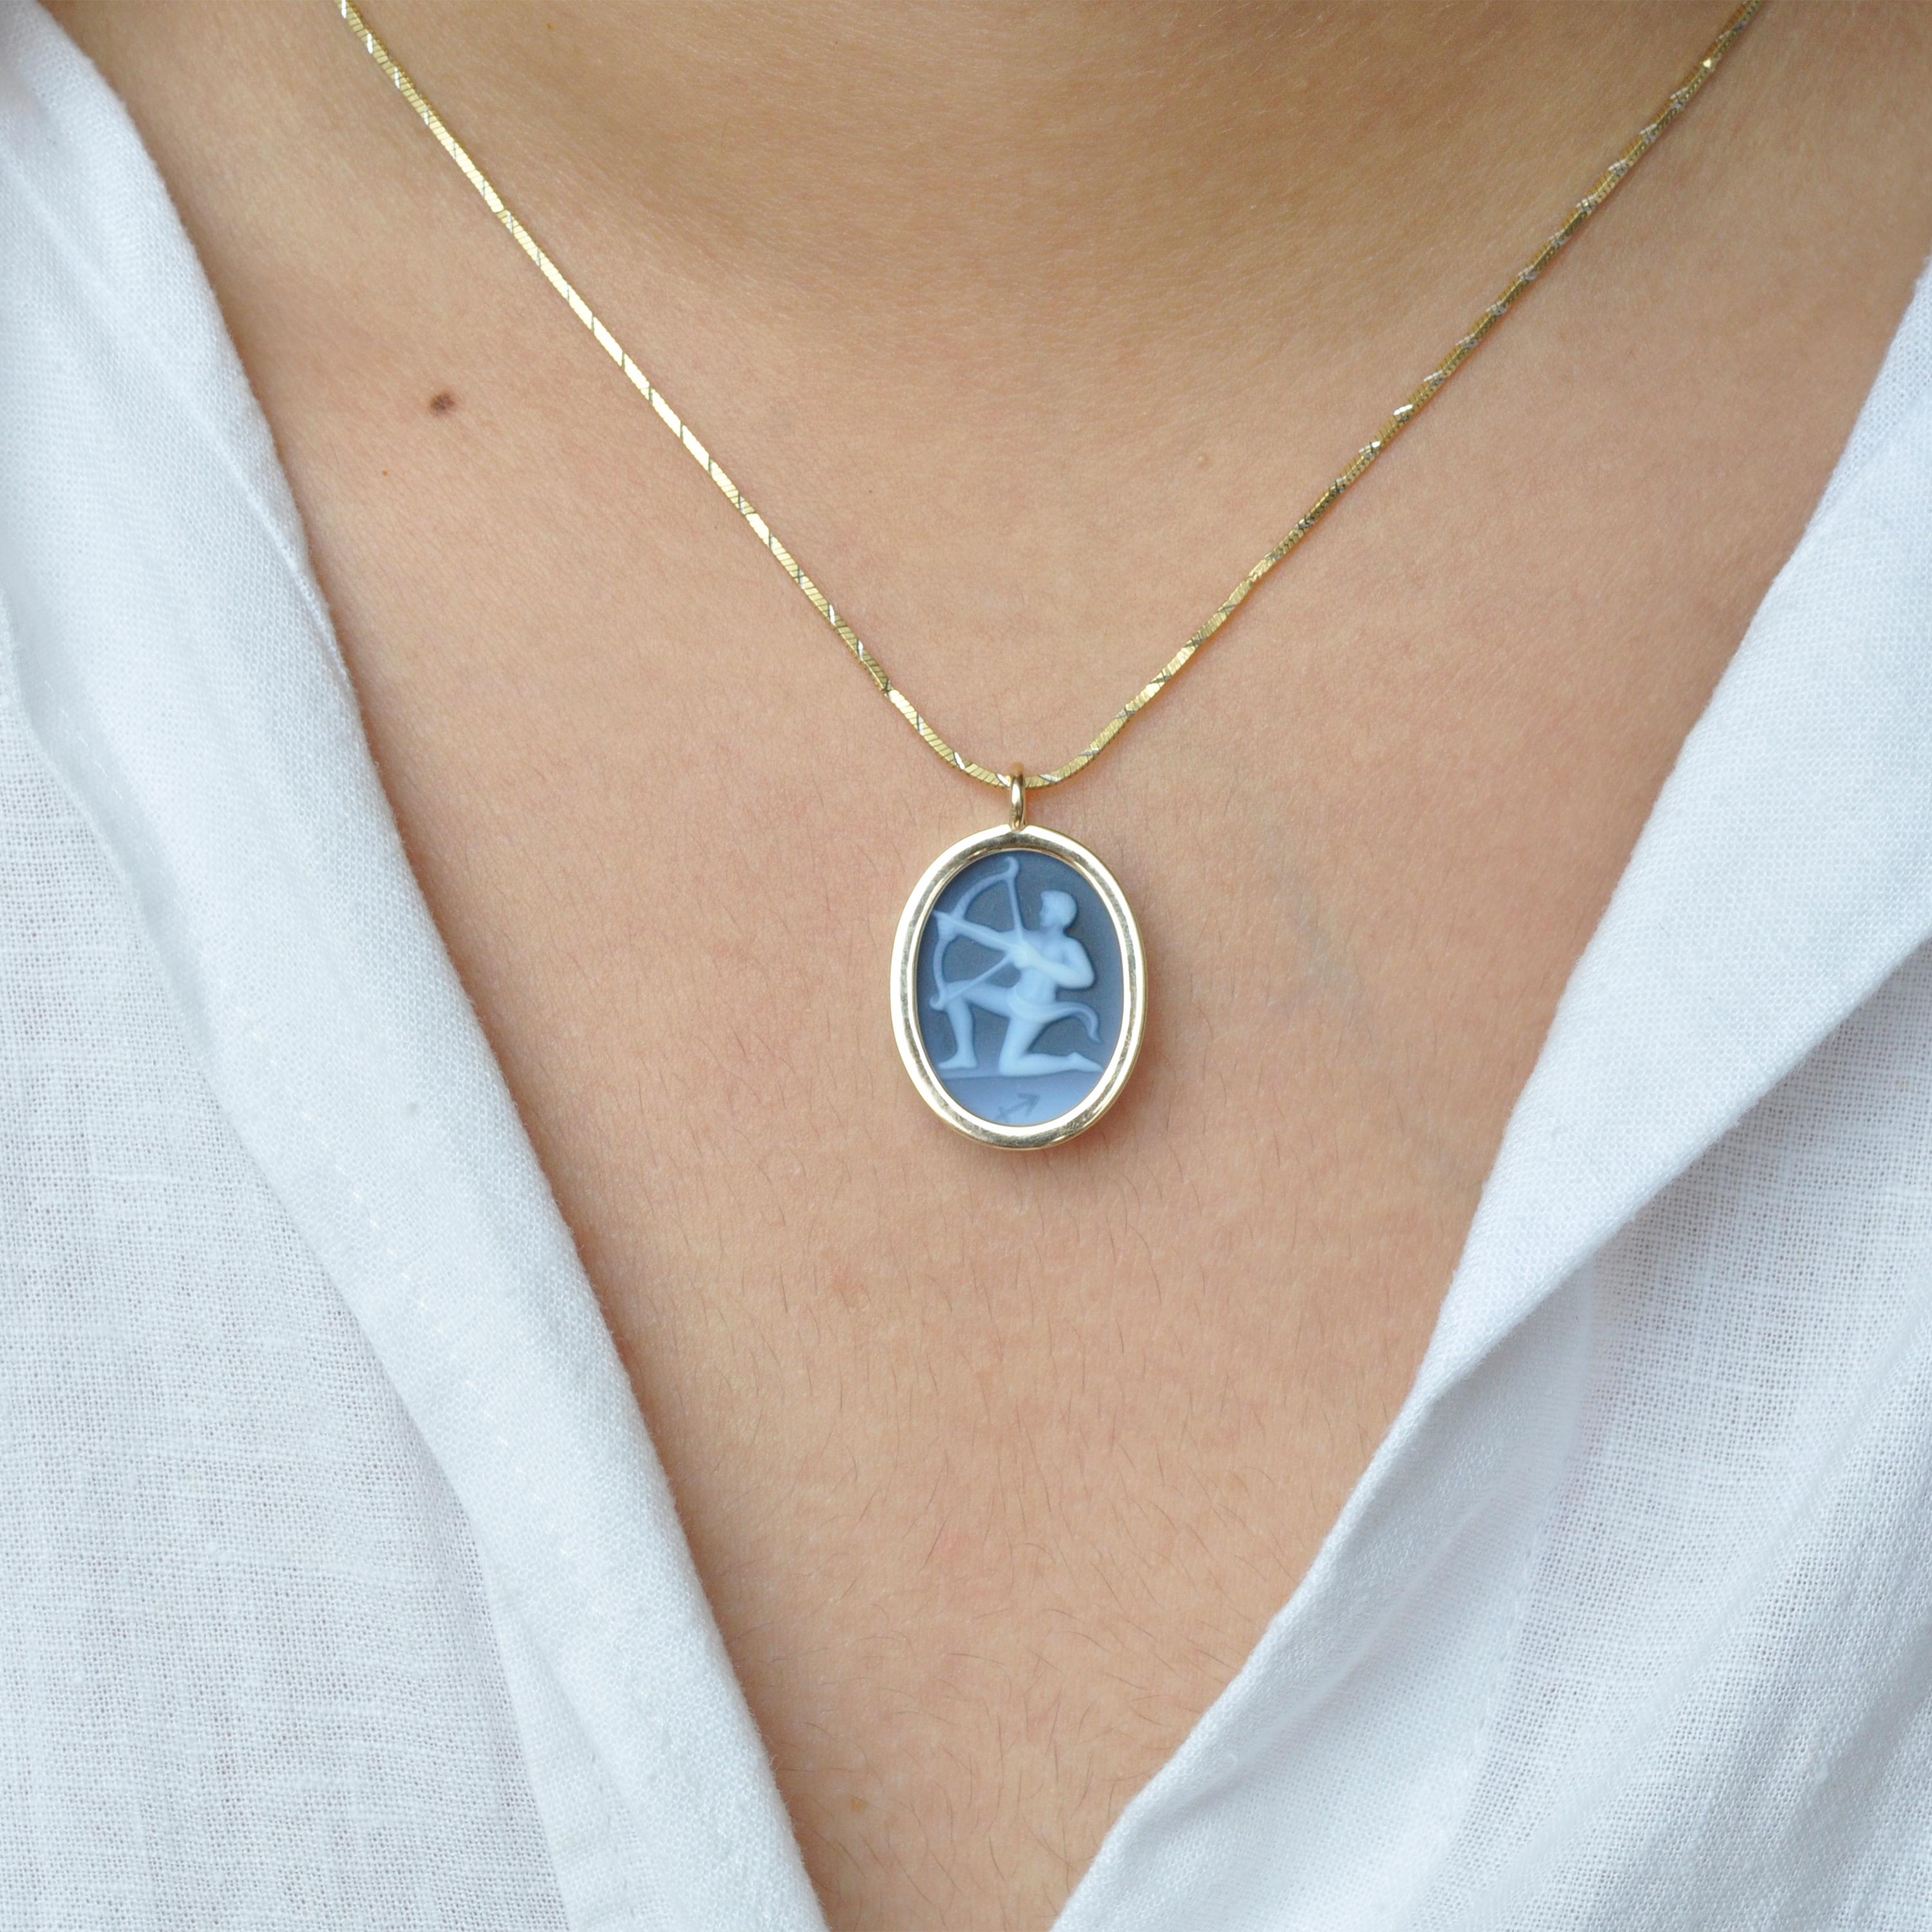 The reversible pendant necklace featuring a Sagittarius sun sign carving cameo zodiac diamond in 14 karat gold is a magnificent piece of jewelry that embodies exceptional craftsmanship, elegance, and personalization. With its reversible design, it